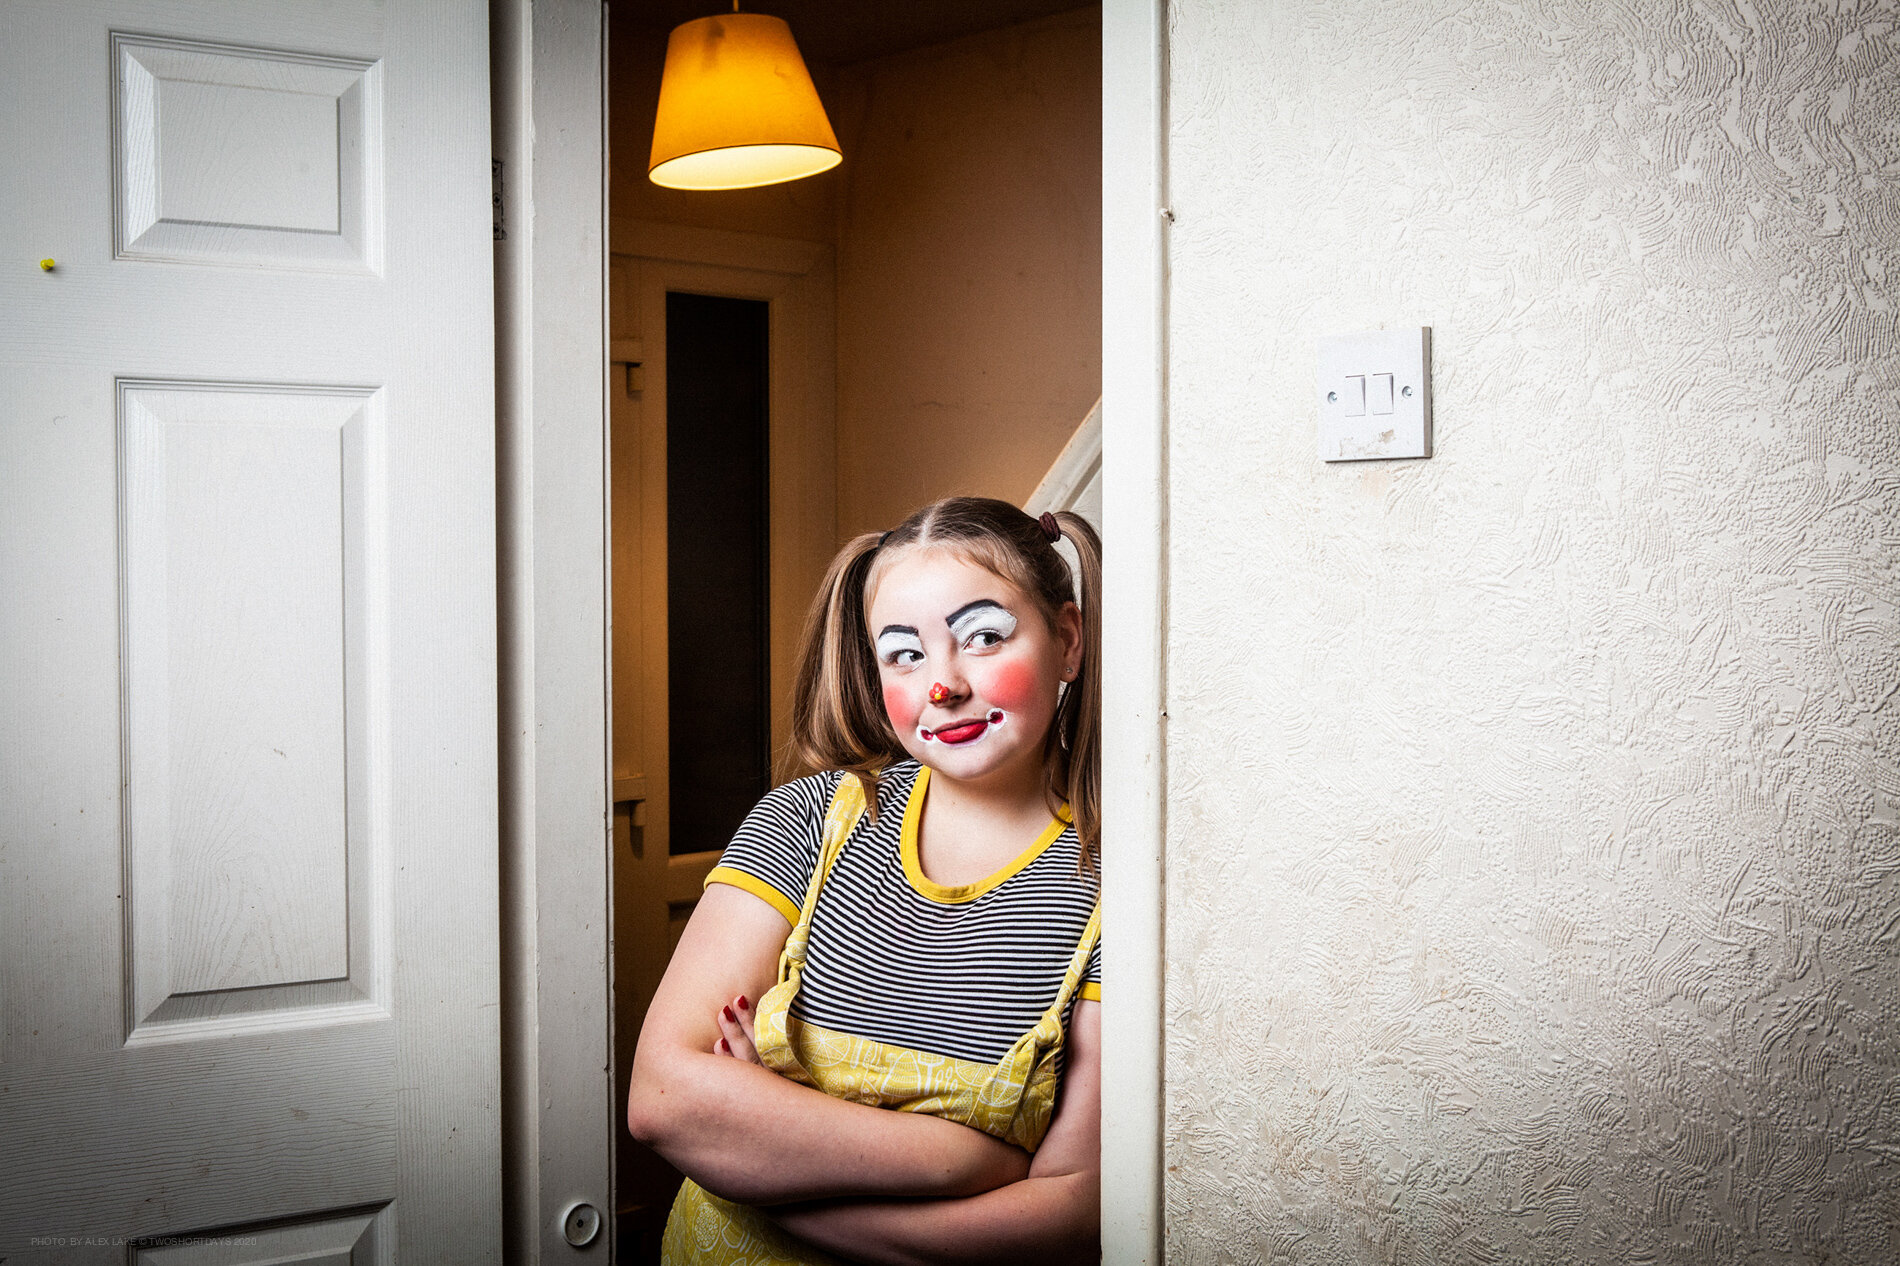 clowns_03_photography_copyright_ALEX_LAKE_do_not_reproduce_without_permission_TWOSHORTDAYS.jpg